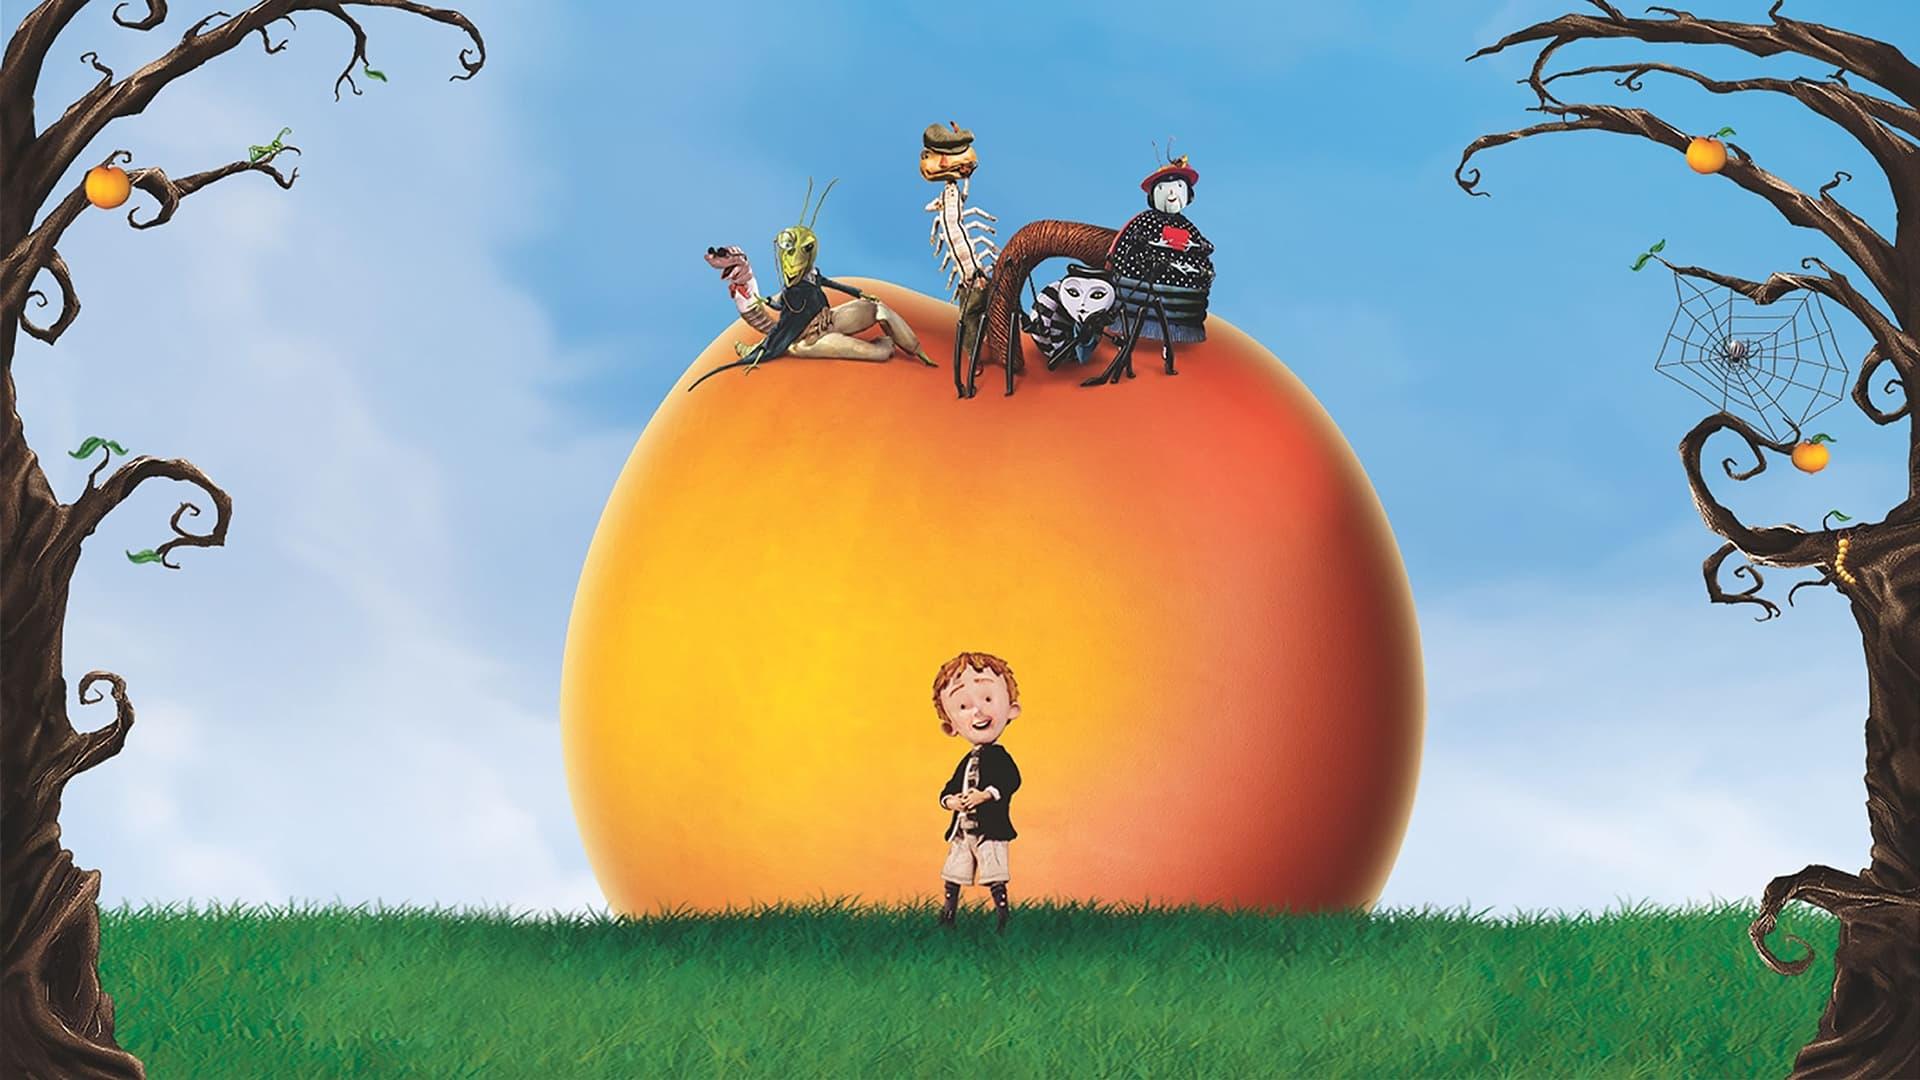 James and the Giant Peach backdrop